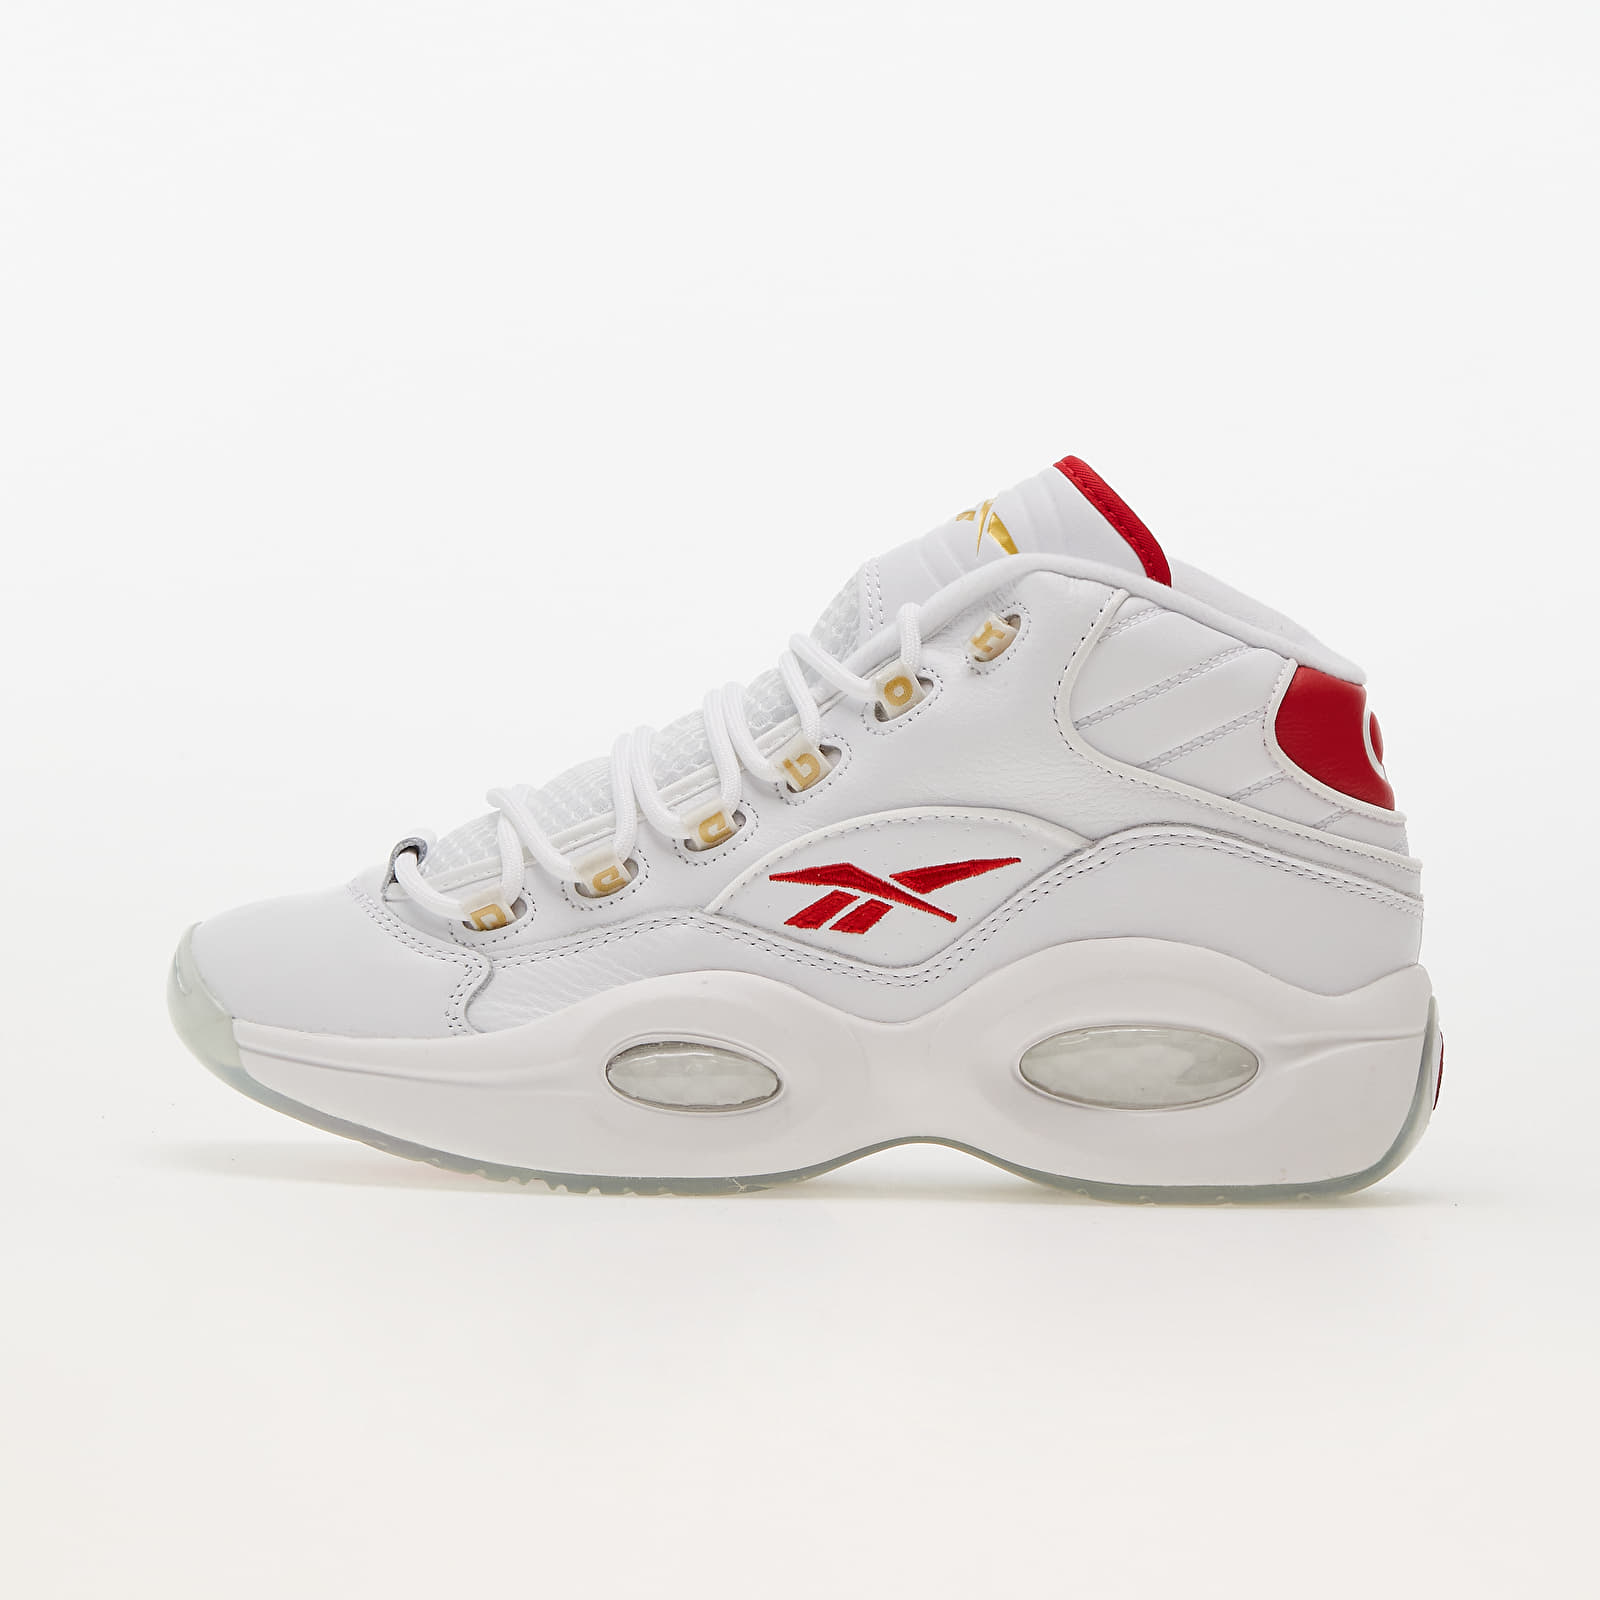 Men's shoes Reebok Question Mid Ftw White/ Ftw White/ Vector Red